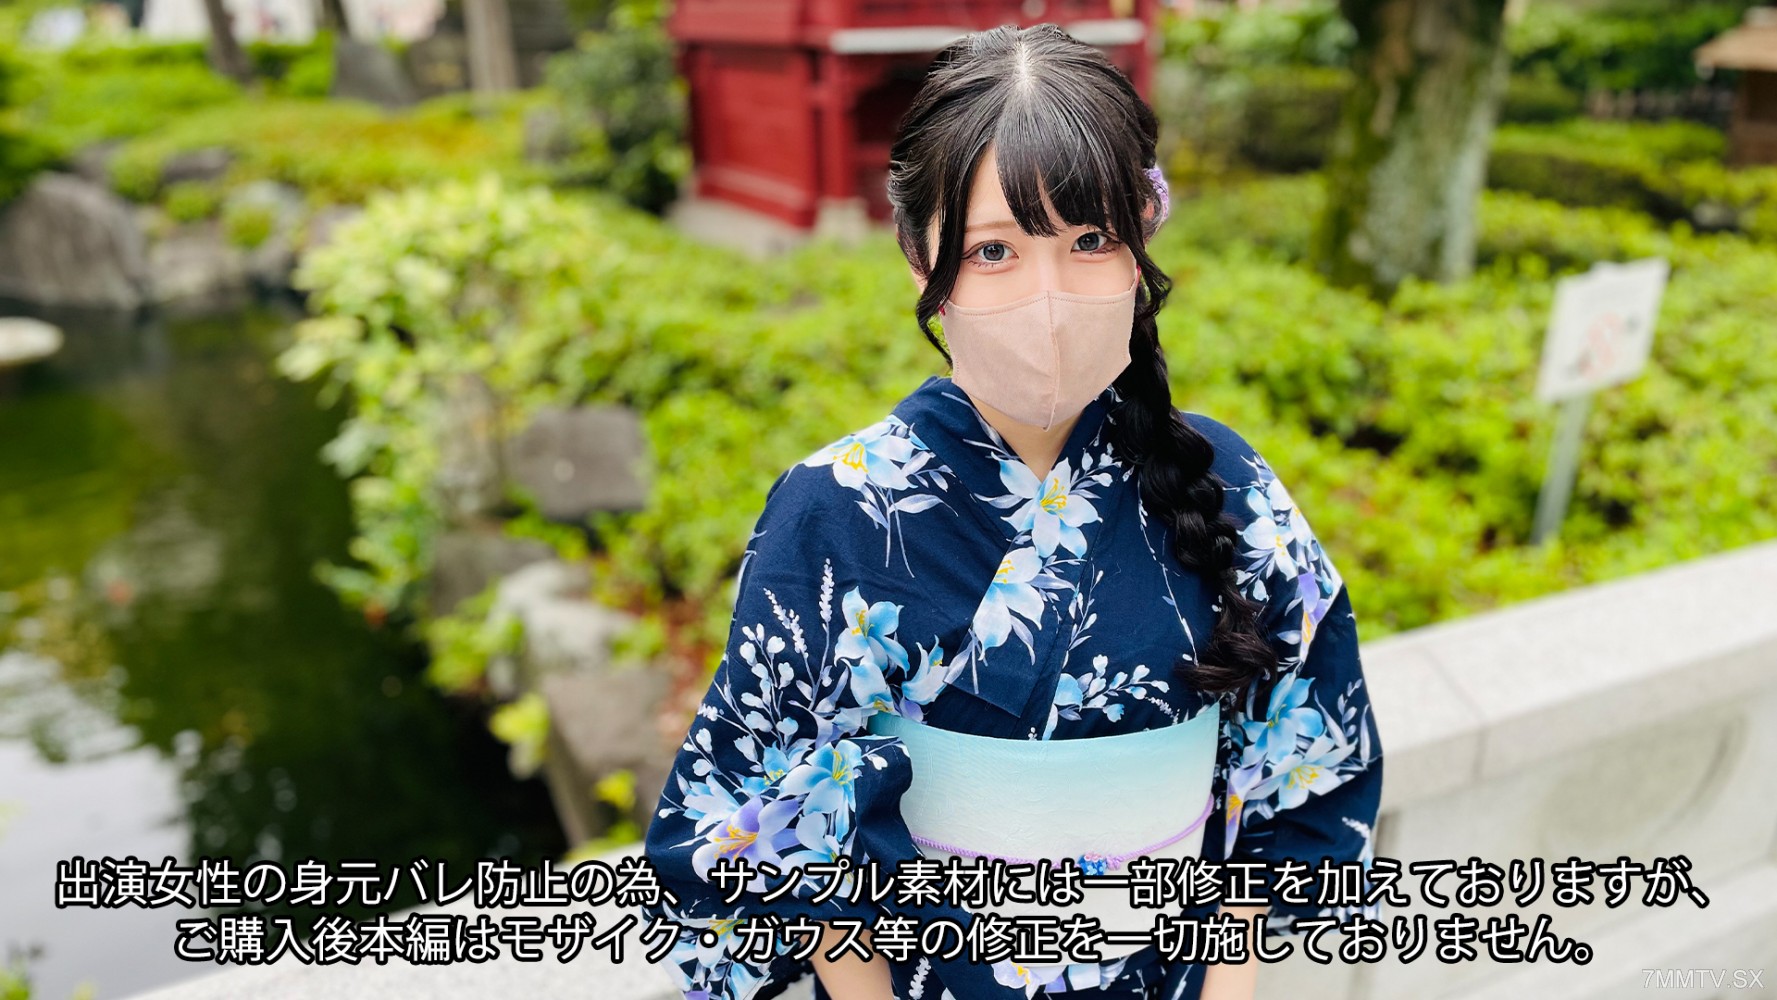 FC2-PPV-3637653 46,613 people follower [Perica is the highest in recorded history] Large amount of squirting legs and purchas...an and stray beauty Naojo beautiful squirting sexual intercourse [Yukata convention summer day enjoyment] FC2-PPV -3637653